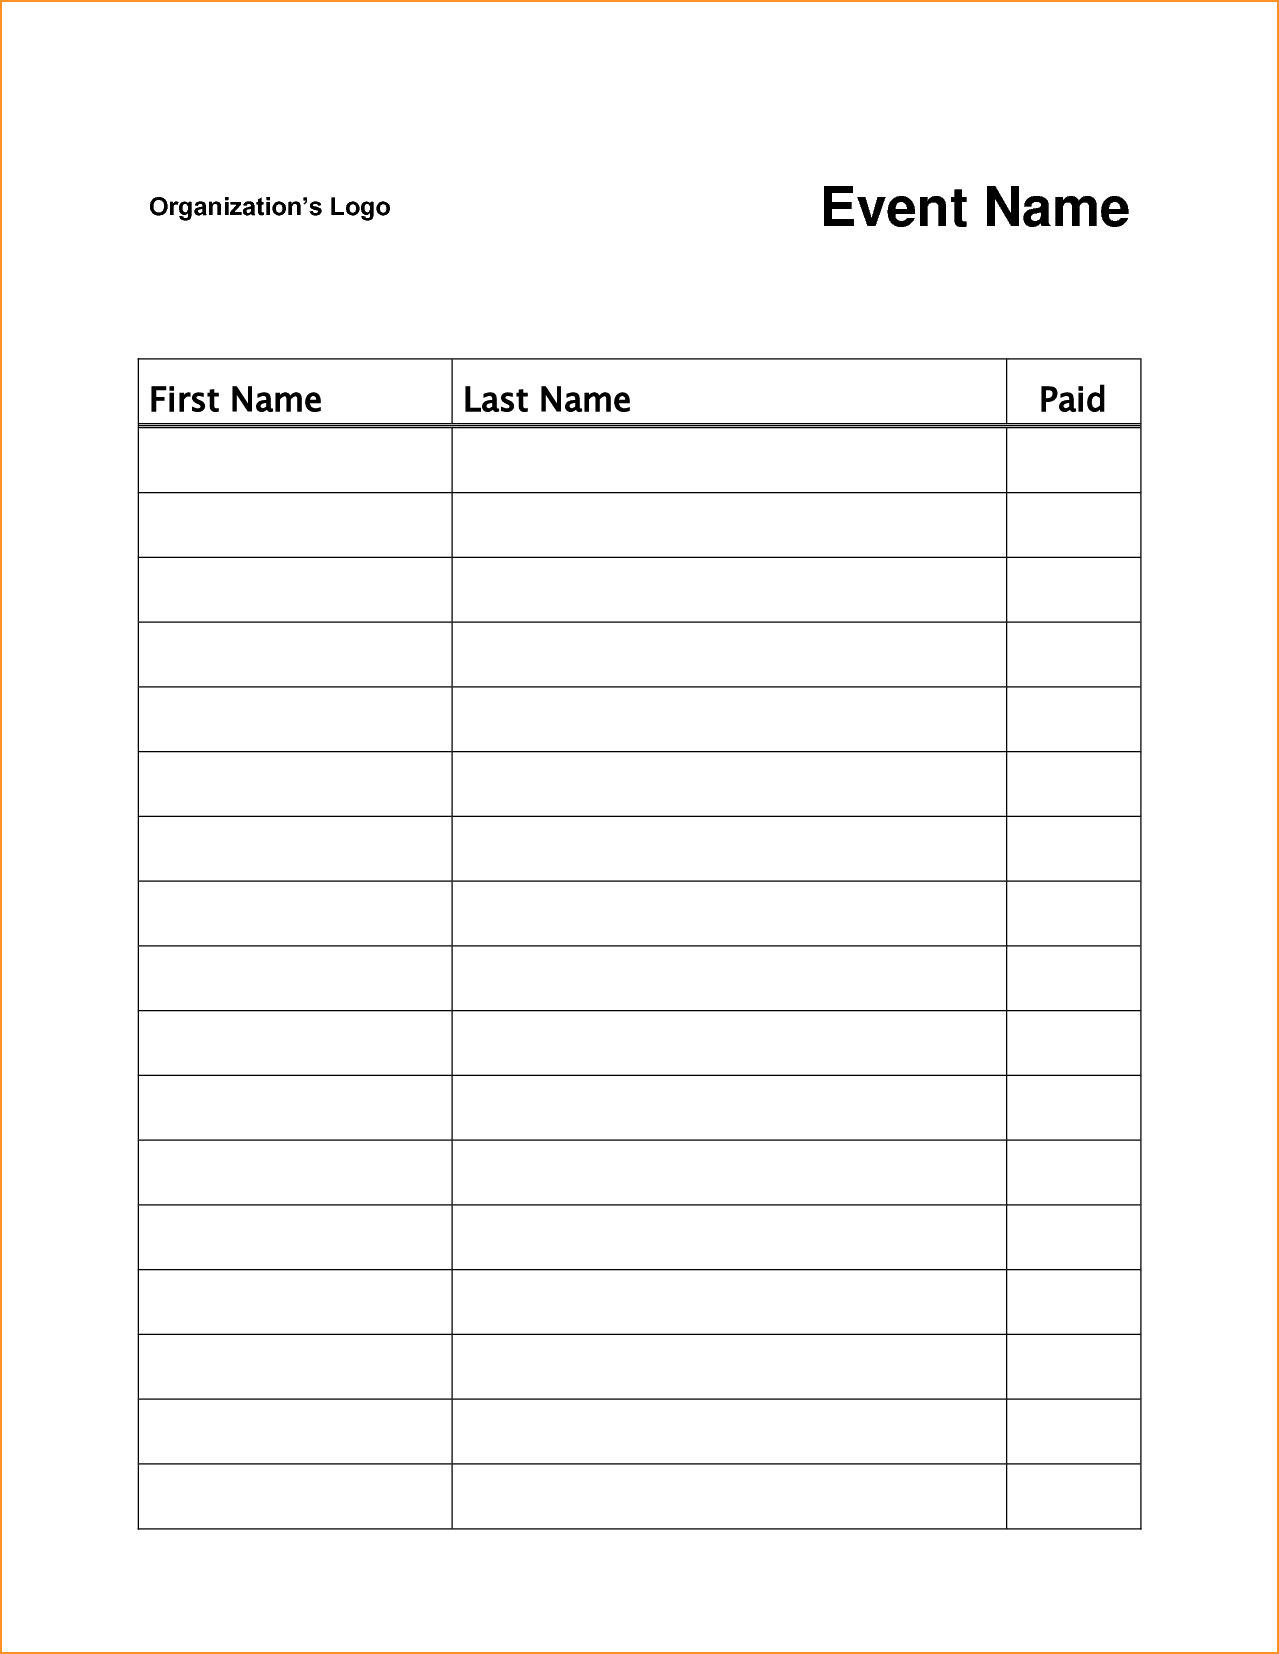 Printable Time Slot Sign Up Sheet Template from newgraph310.weebly.com